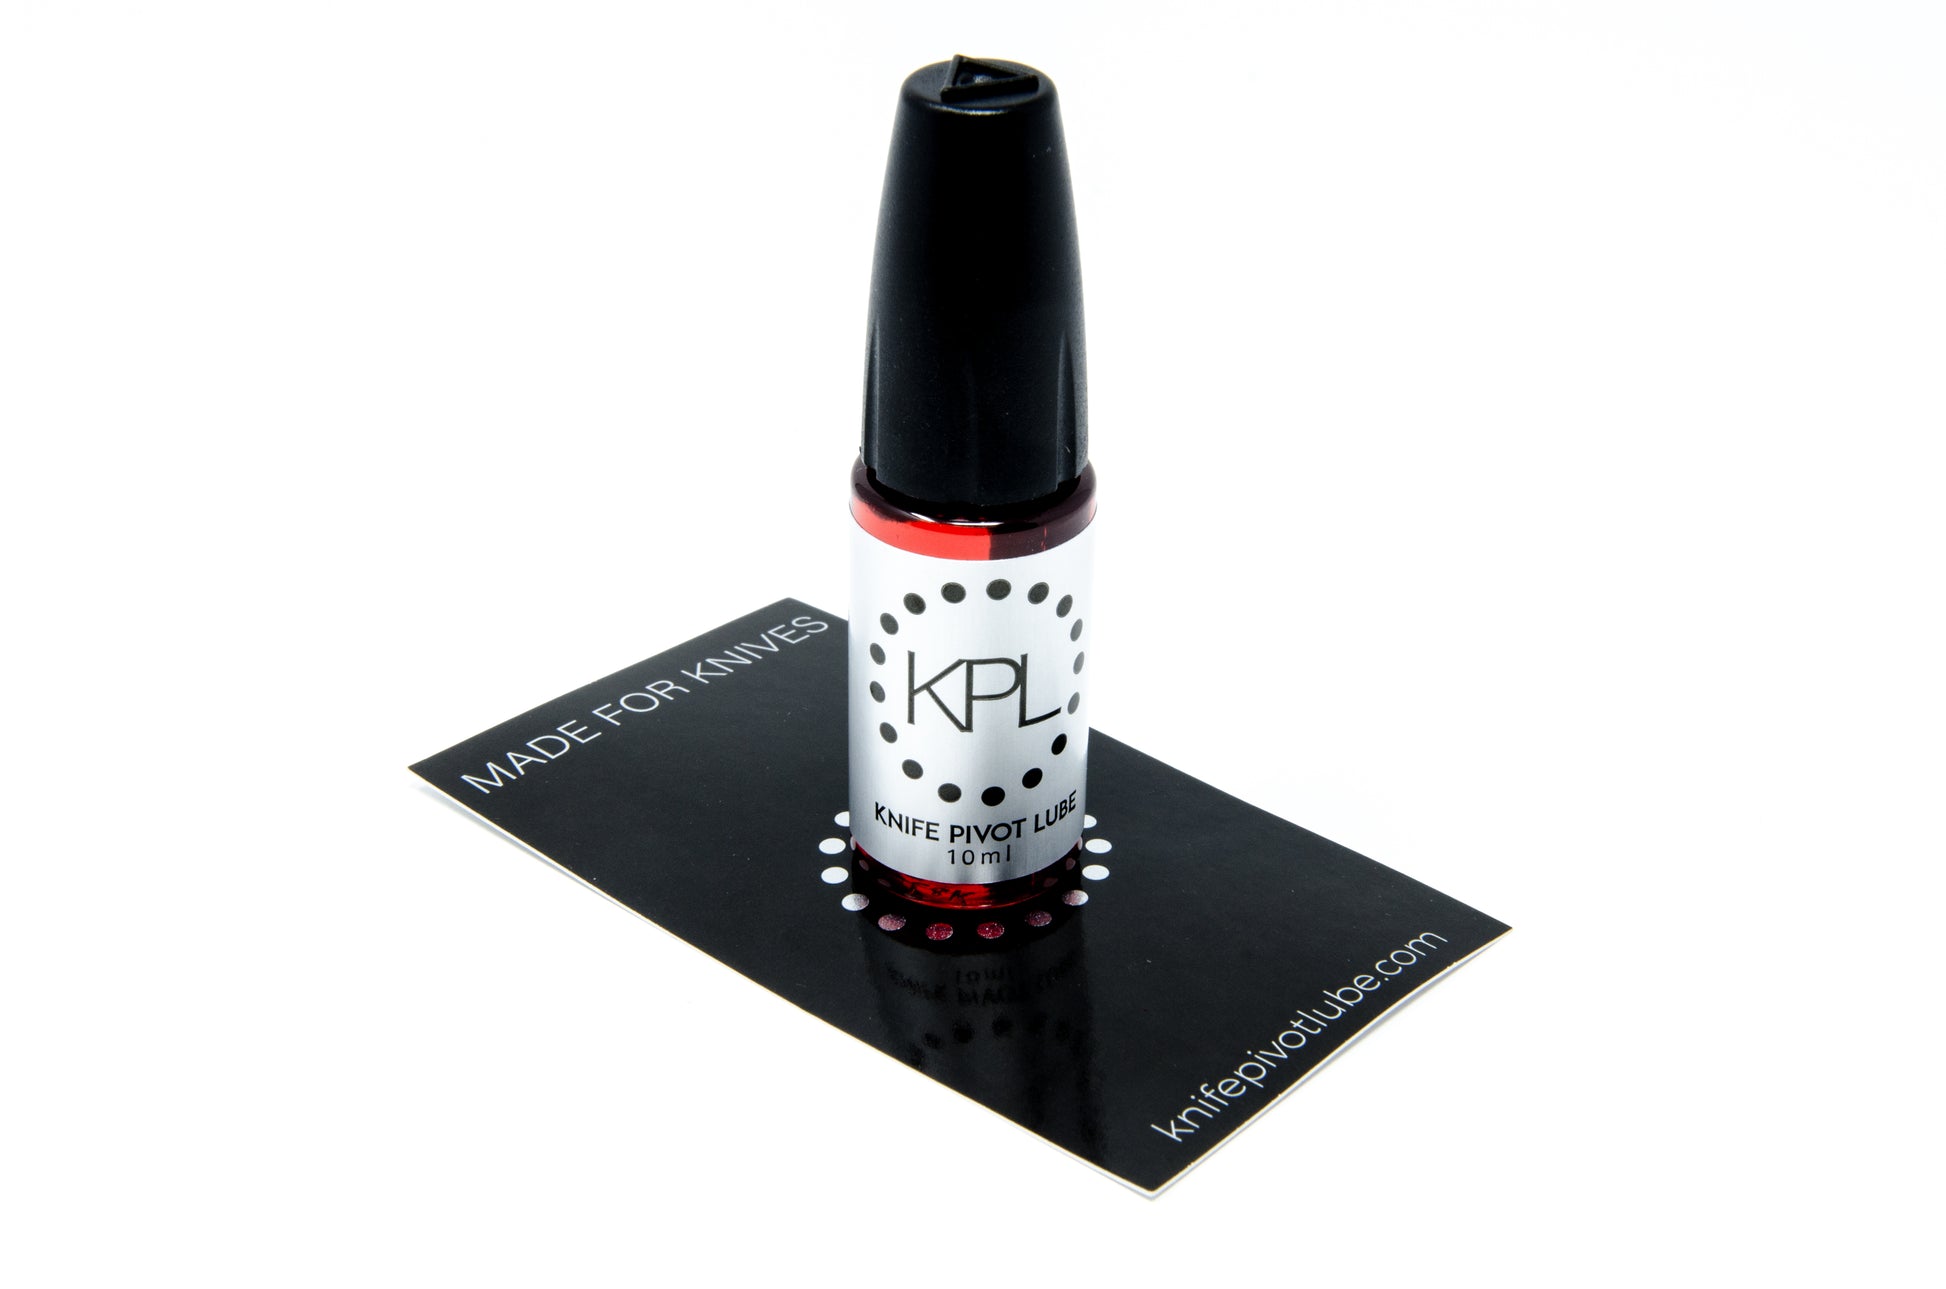 KPL Knife Pivot Lube Made for knives lubericant